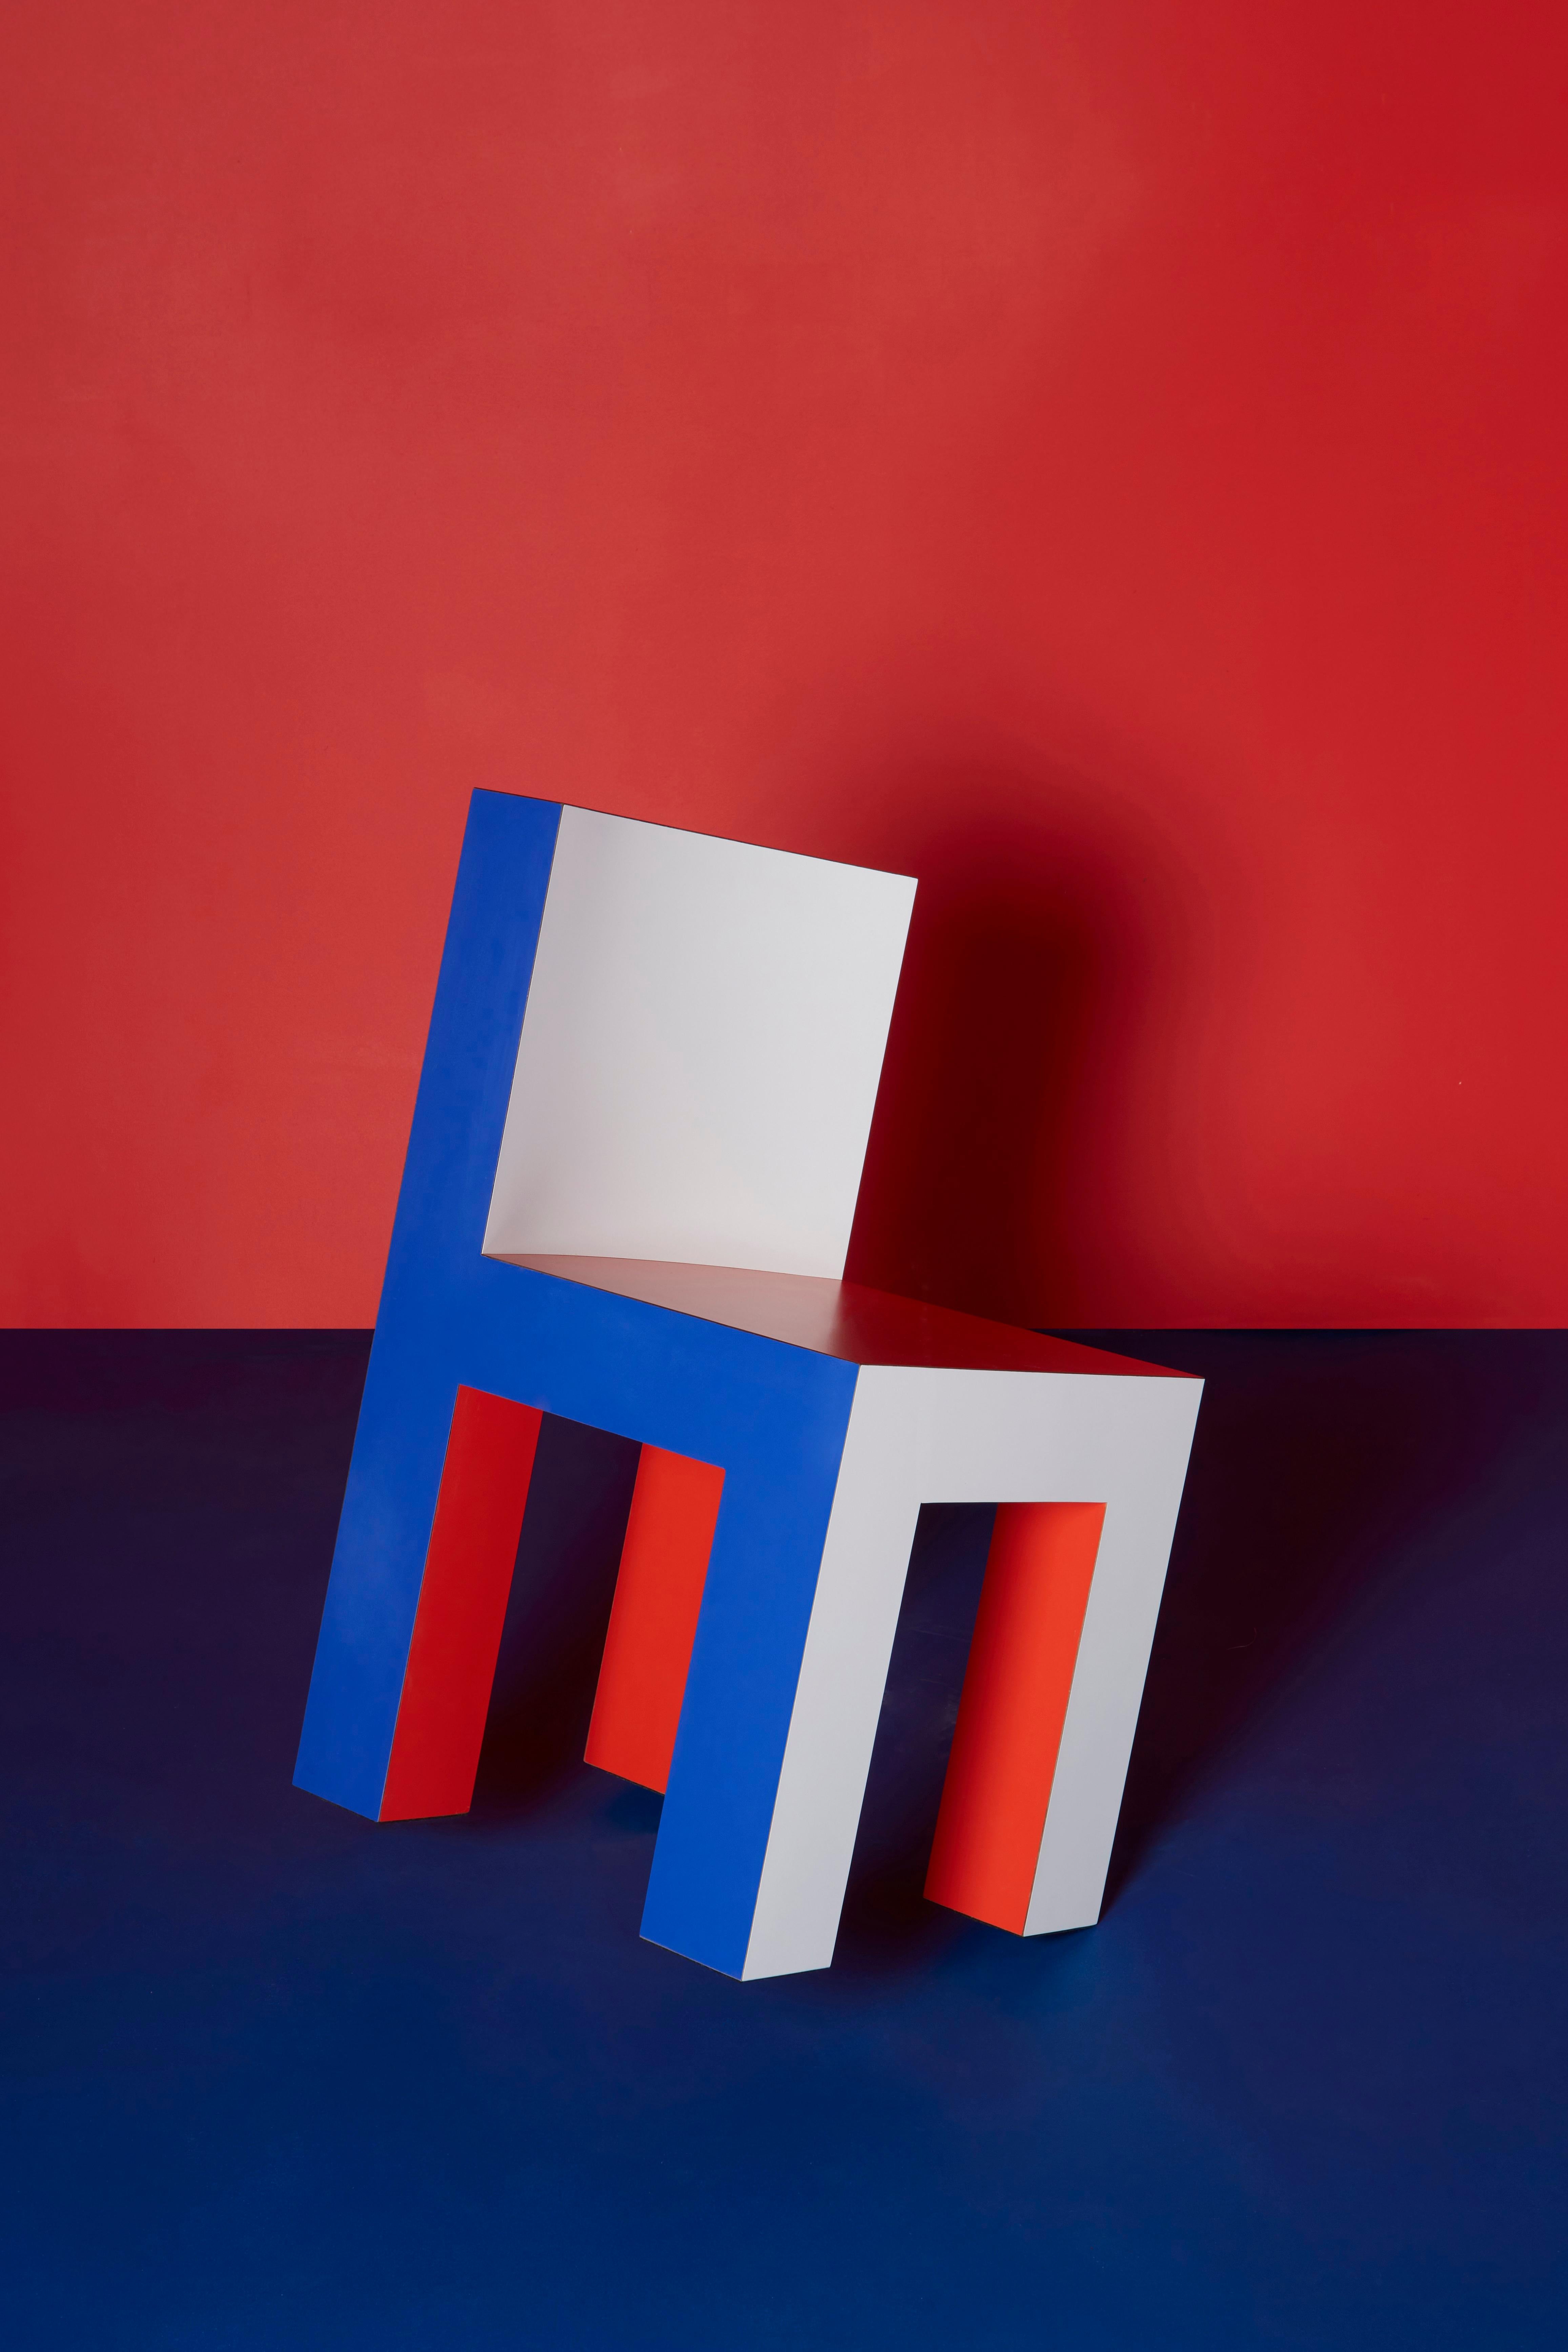 Tagadà chair is the outcome of the studio’s DNA: a matrix of rigor and playfulness, minimalism and irony. Shapes, proportions and colors comes together in an iconic design piece.

Tagadà Collection is a newly developed 
series of element. This